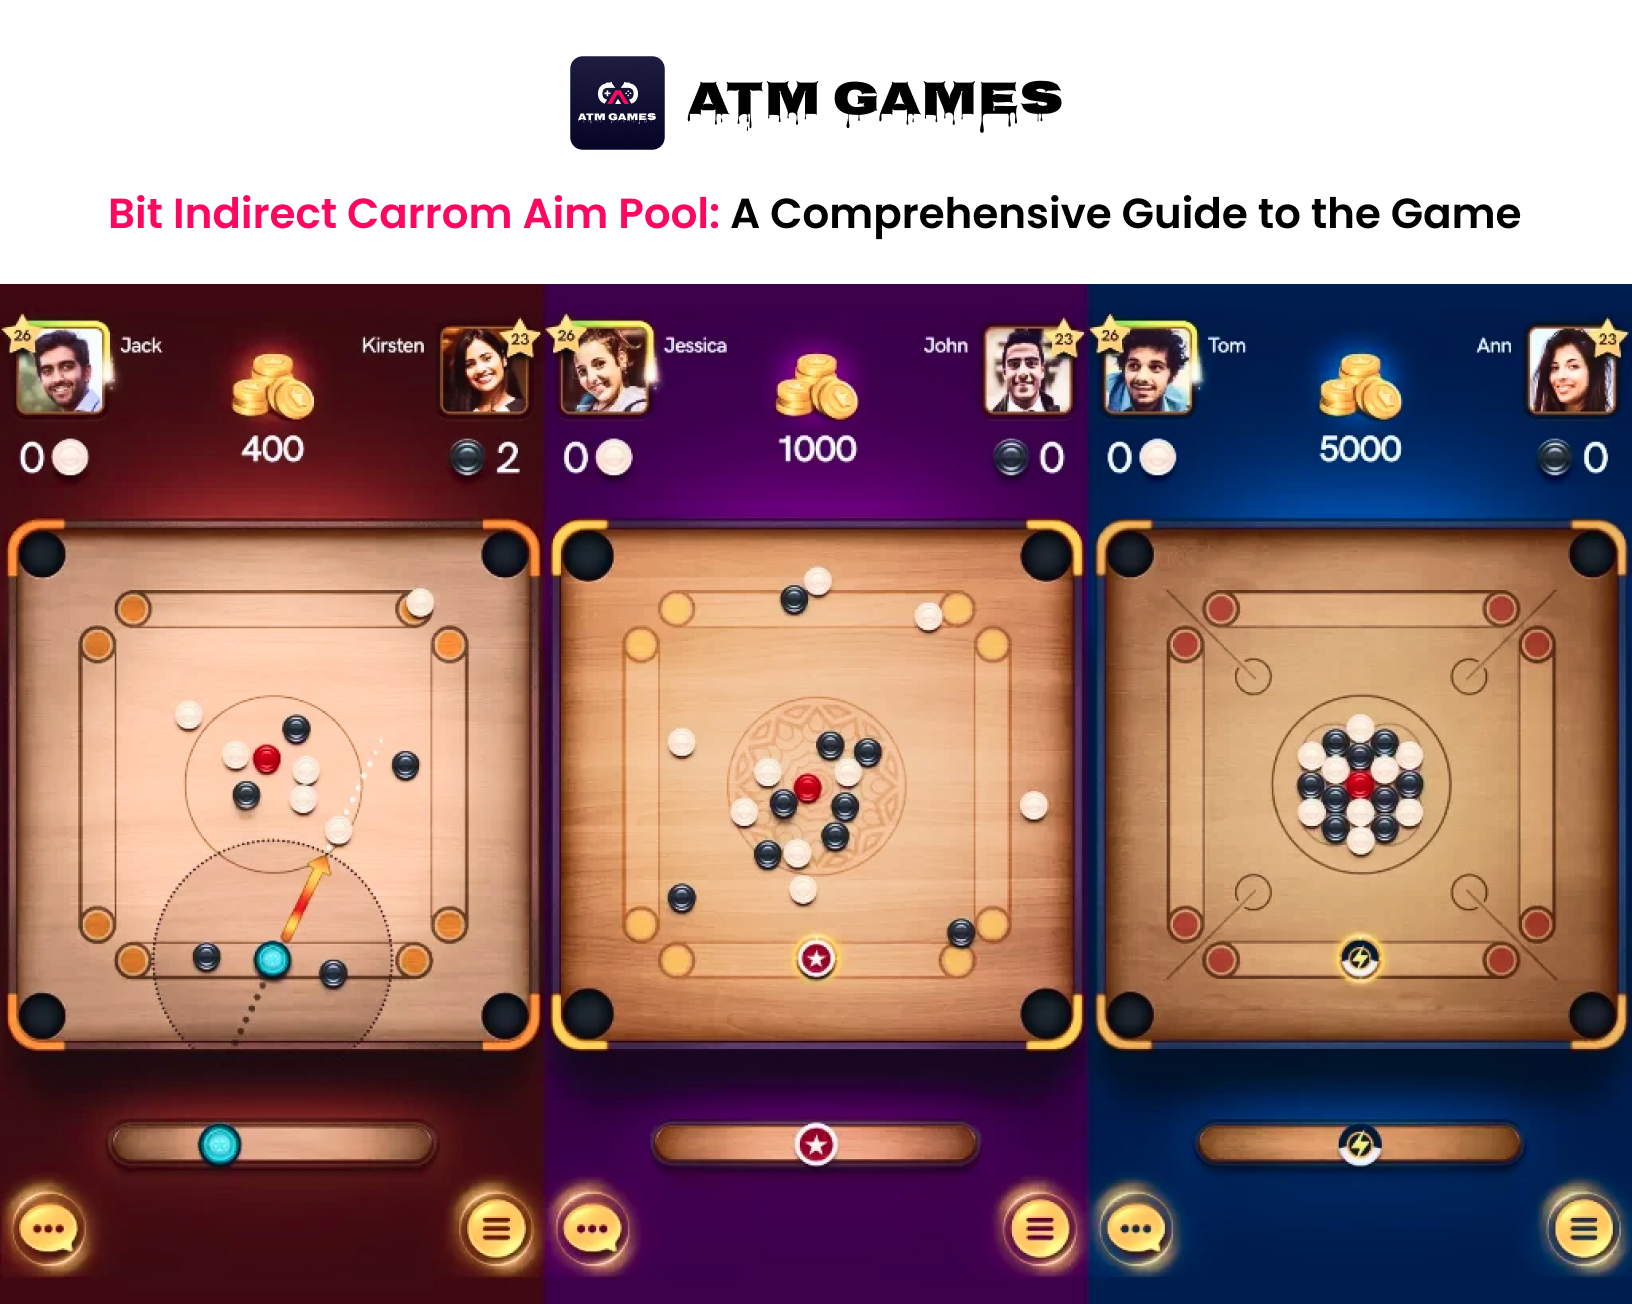 Bit Indirect Carrom Aim Pool: A Comprehensive Guide to the Game